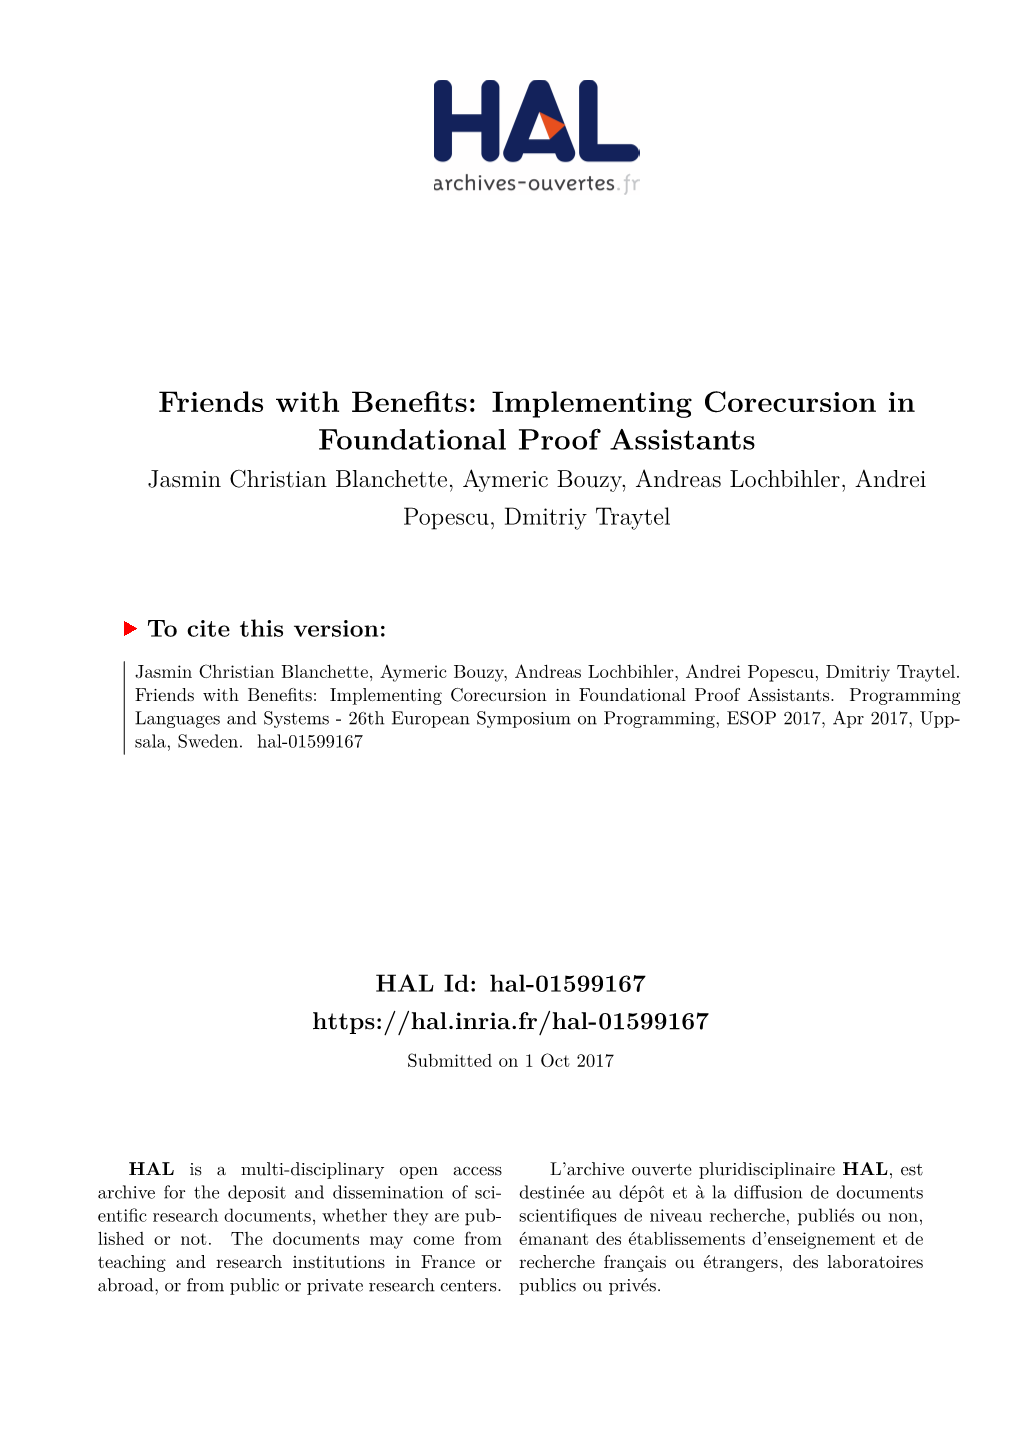 Implementing Corecursion in Foundational Proof Assistants Jasmin Christian Blanchette, Aymeric Bouzy, Andreas Lochbihler, Andrei Popescu, Dmitriy Traytel